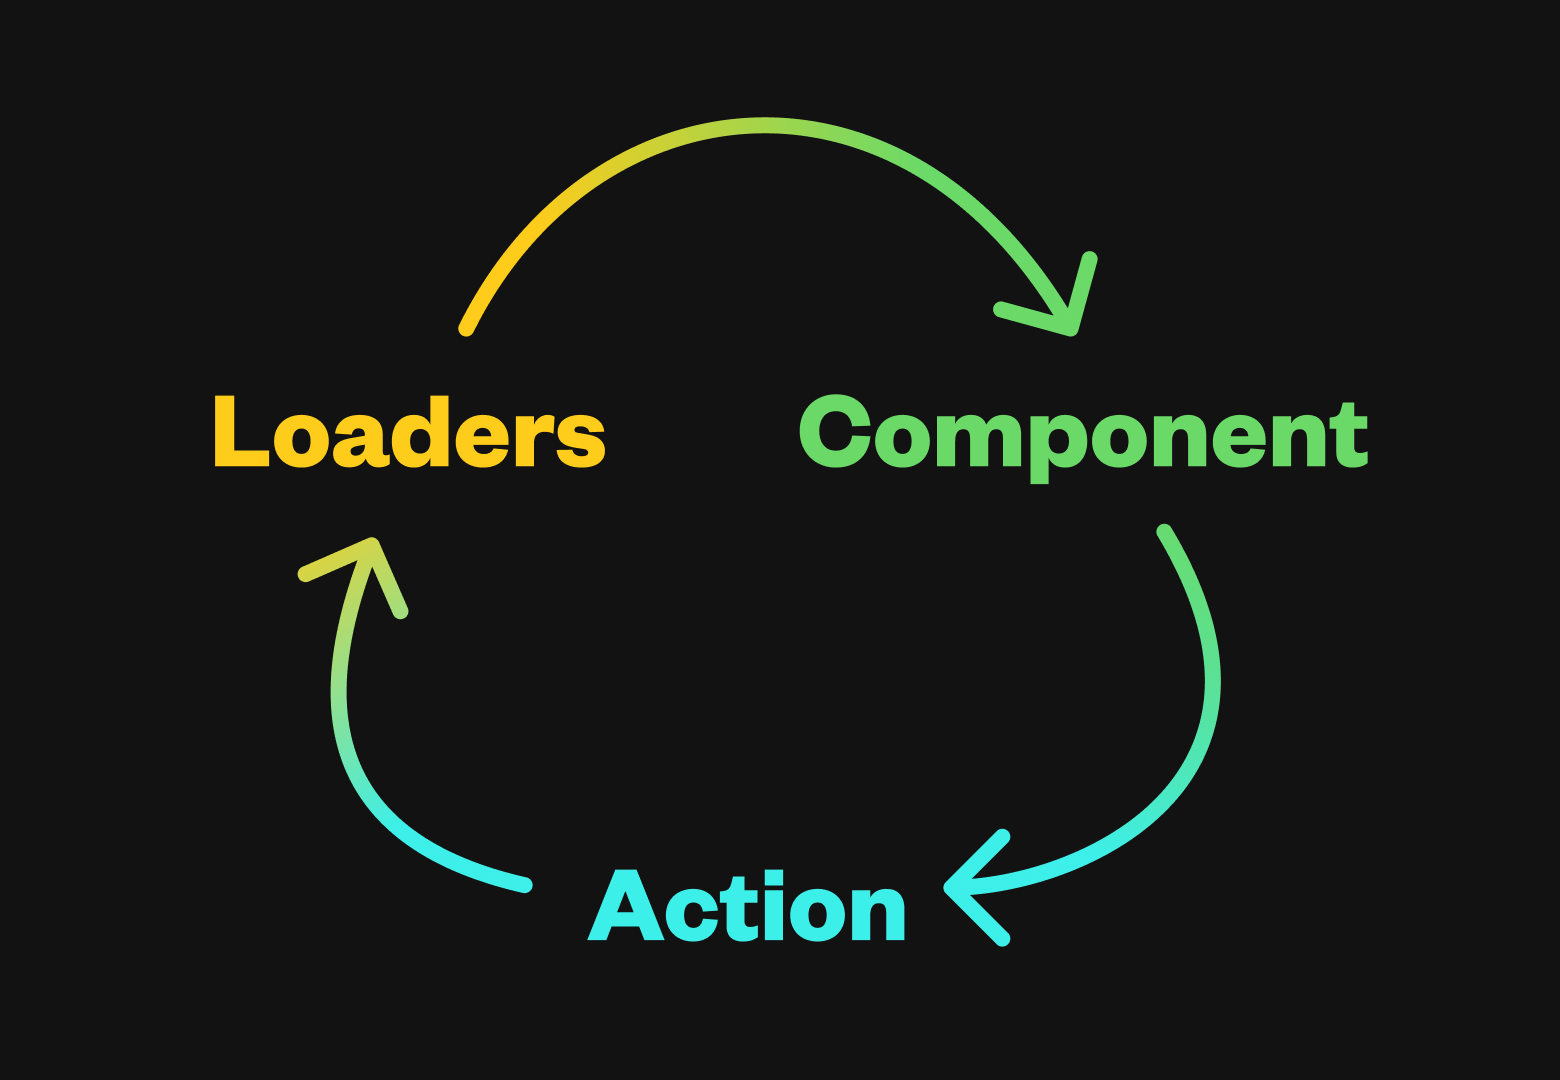 The words “Loader” -> “Action” -> “Component” shown in a circular diagram.